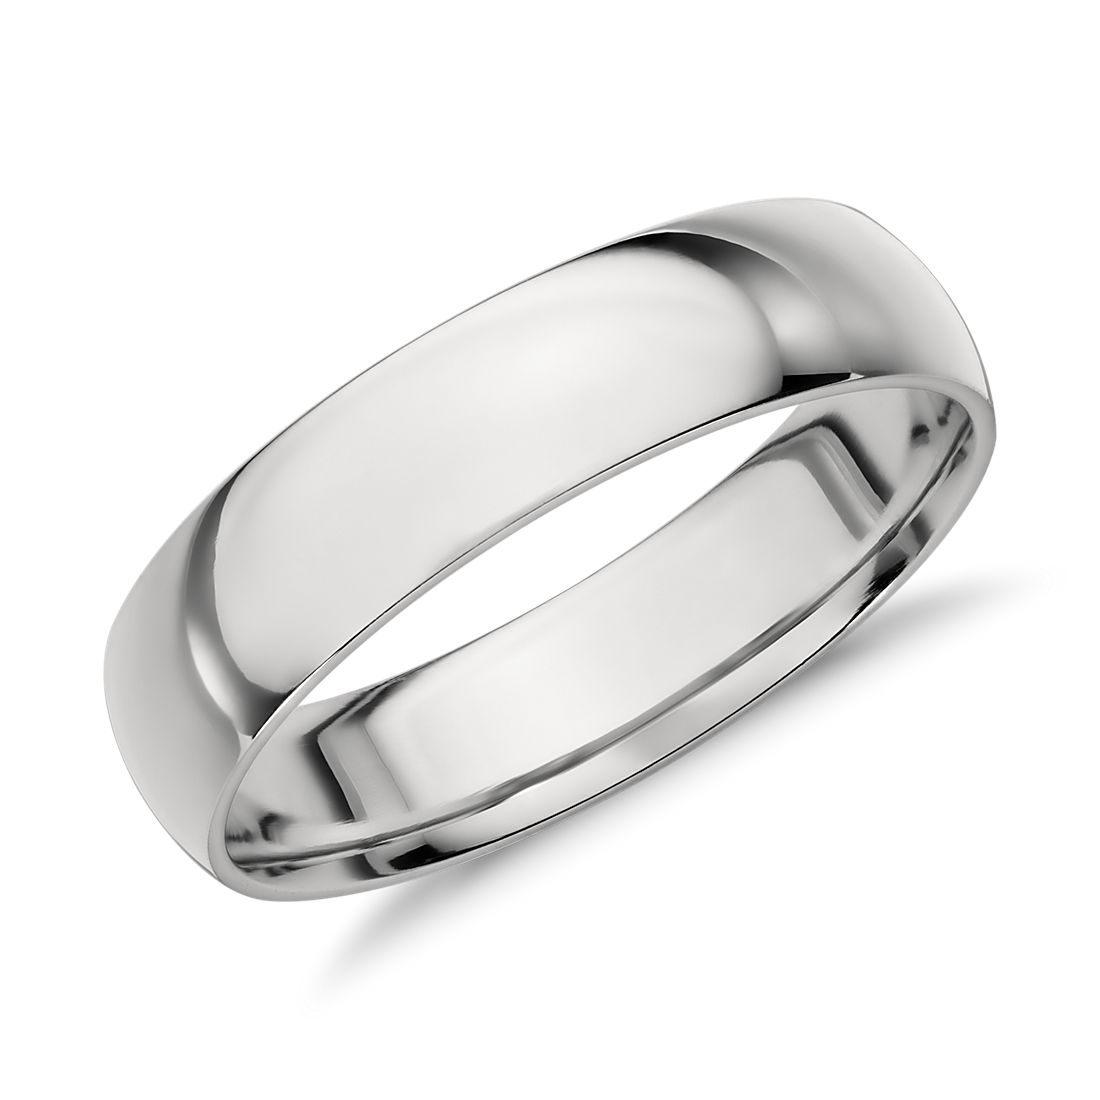 5mm Solid Platinum Plain Dome Half Round Comfort Fit Wedding Band Ring All Sizes 